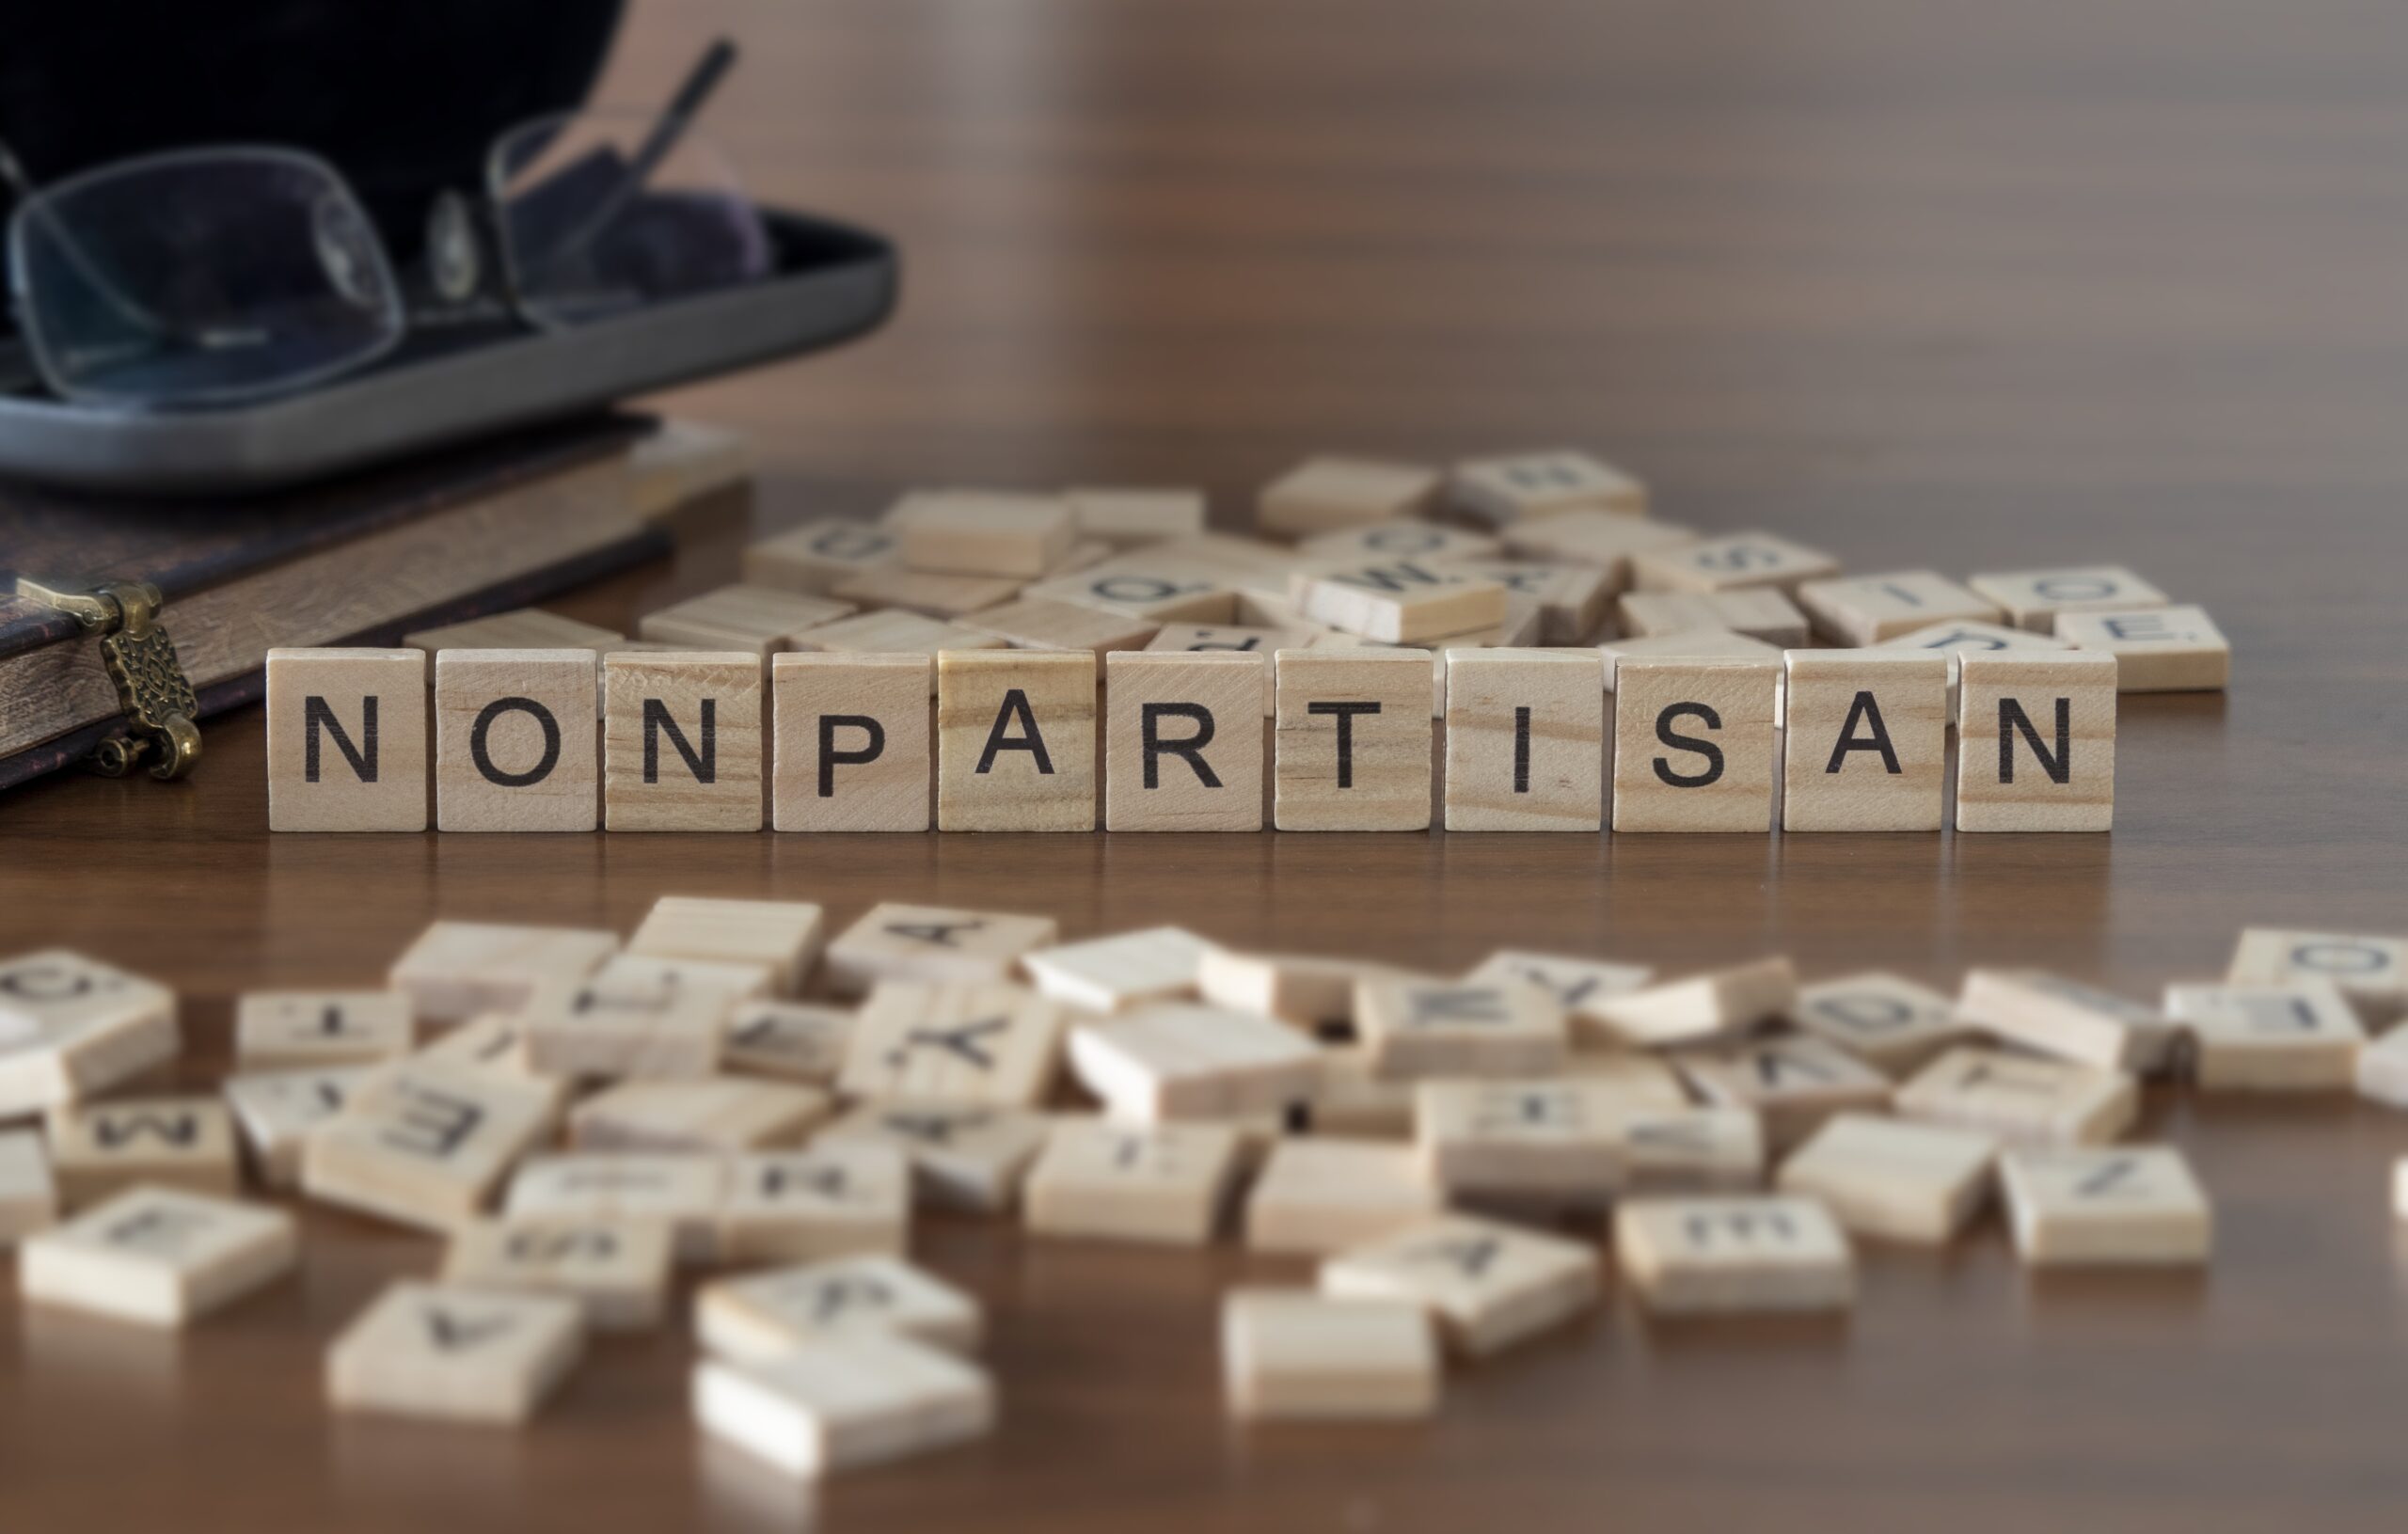 "NONPARTISAN" written out with Scrabble tiles